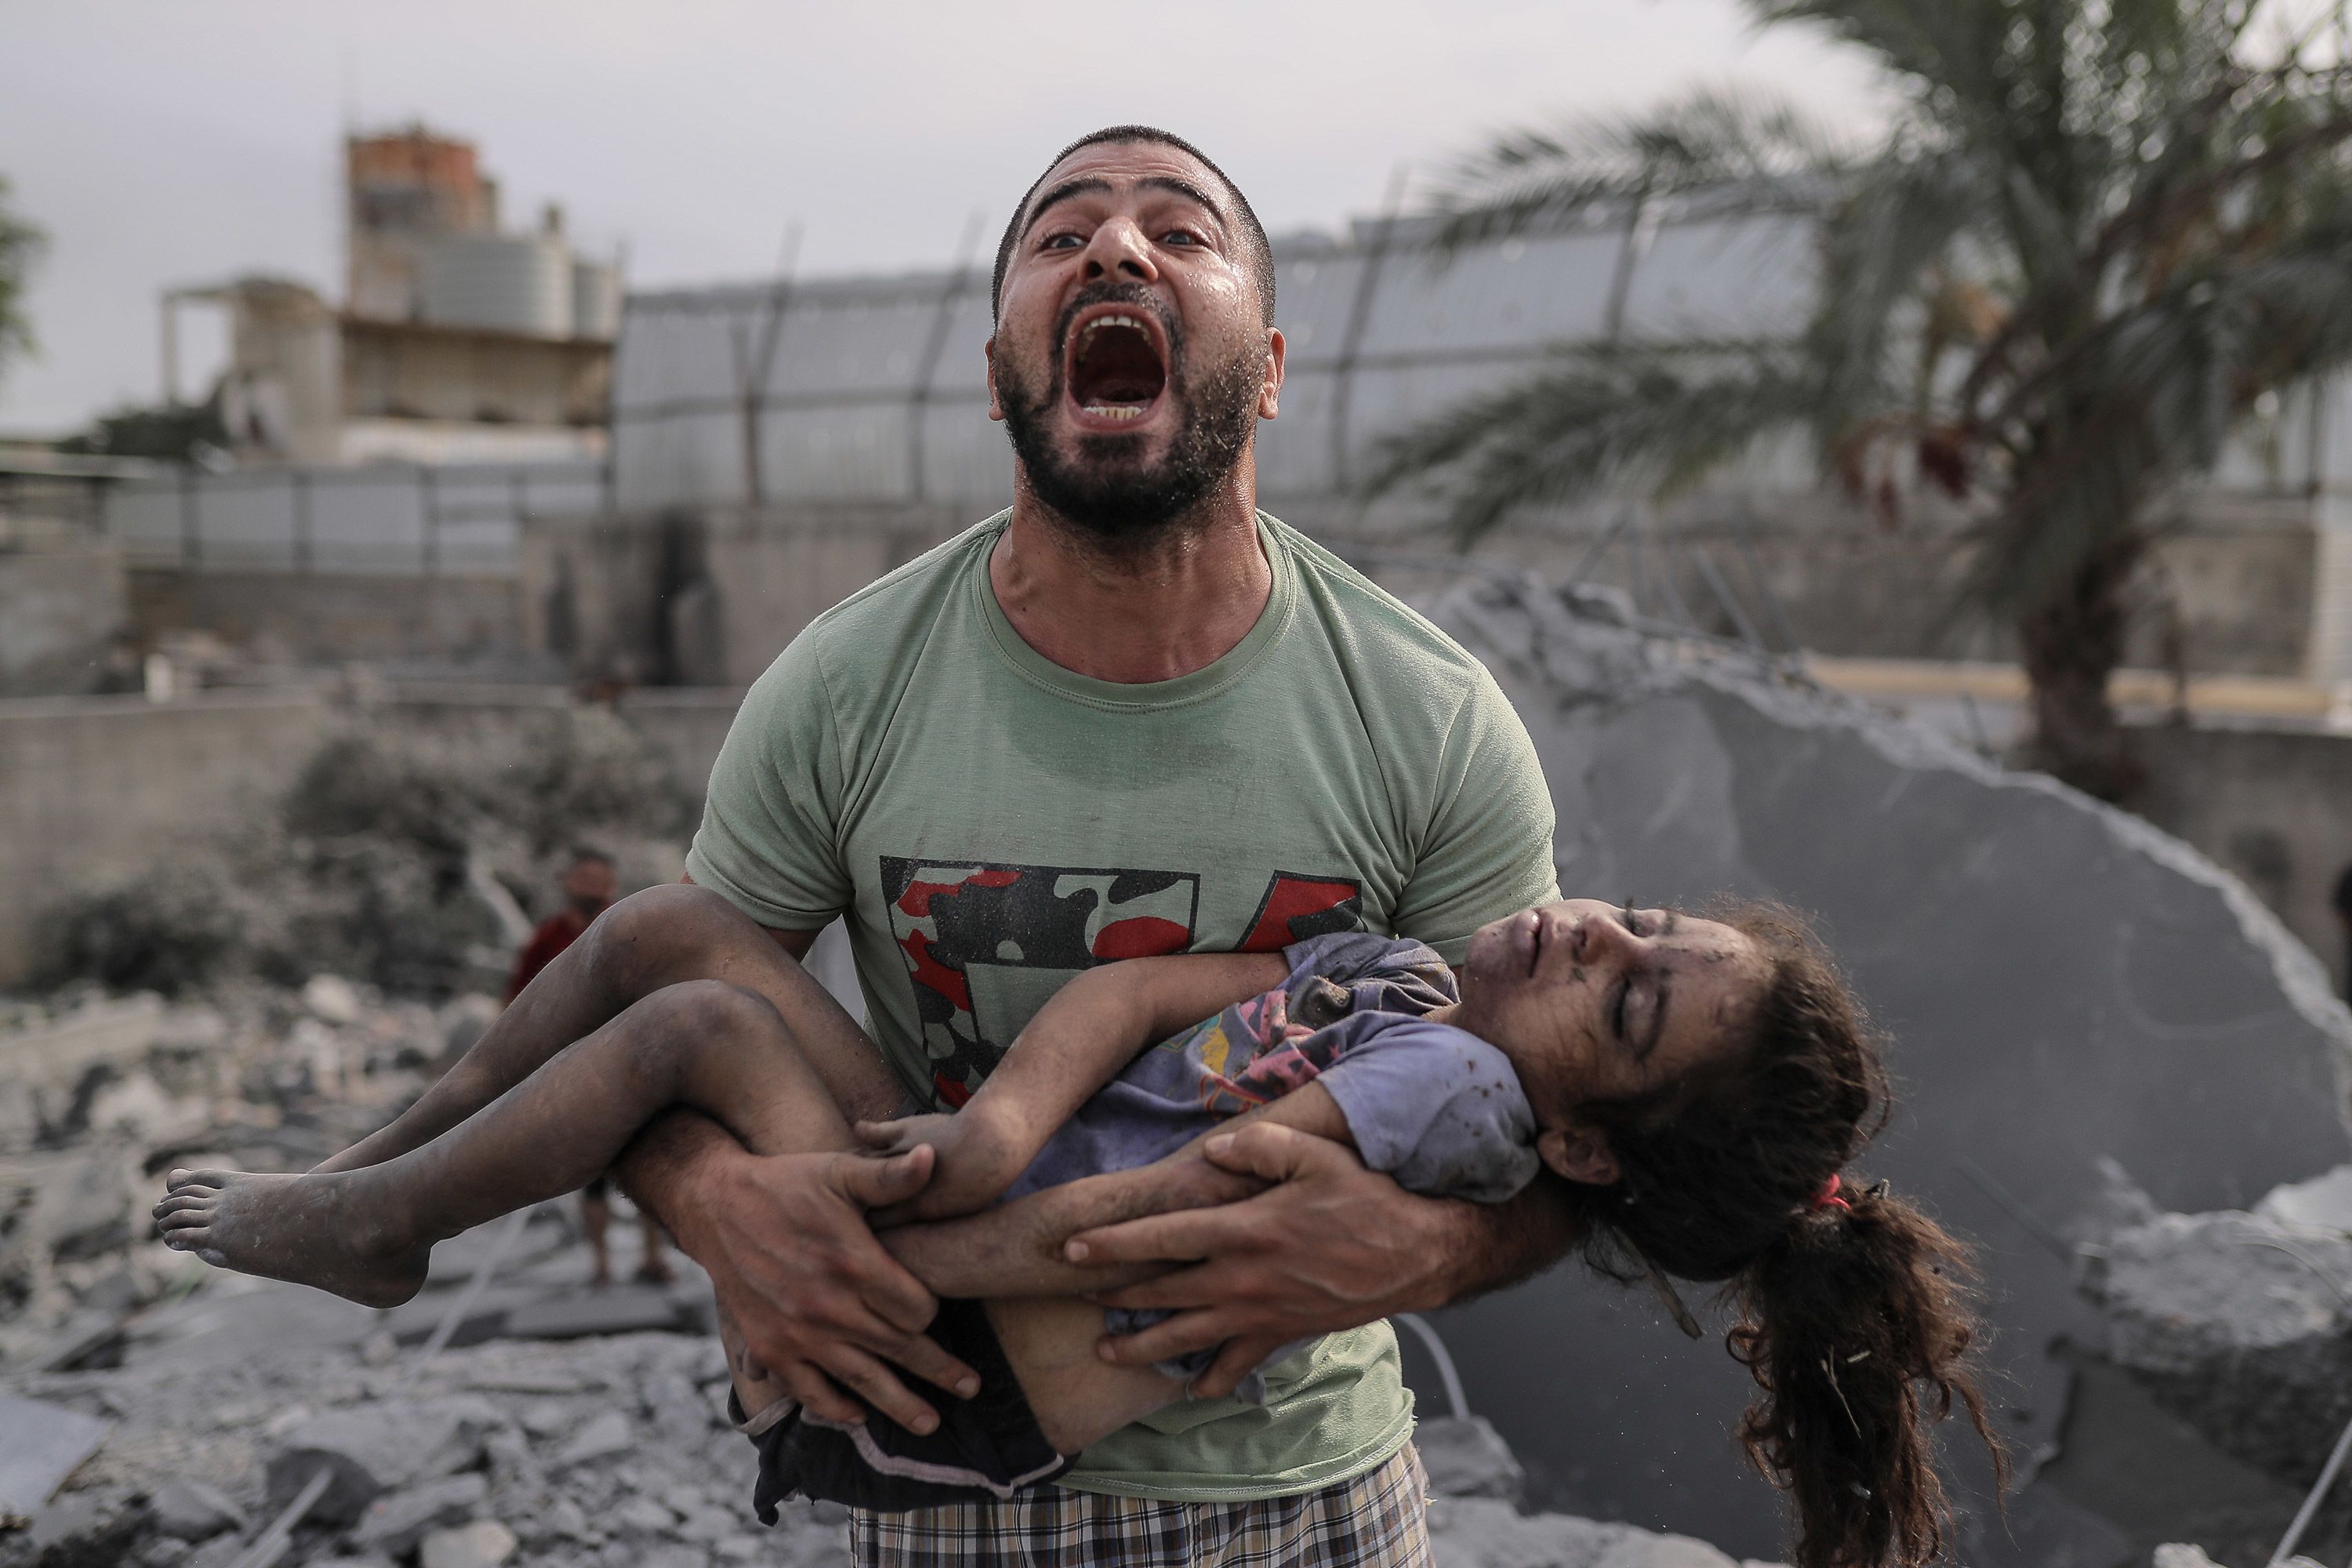 A Palestinian man reacts as he carries the body of his cousin who was pulled from the rubble after Israeli airstrikes in Gaza City on Monday, October 9.